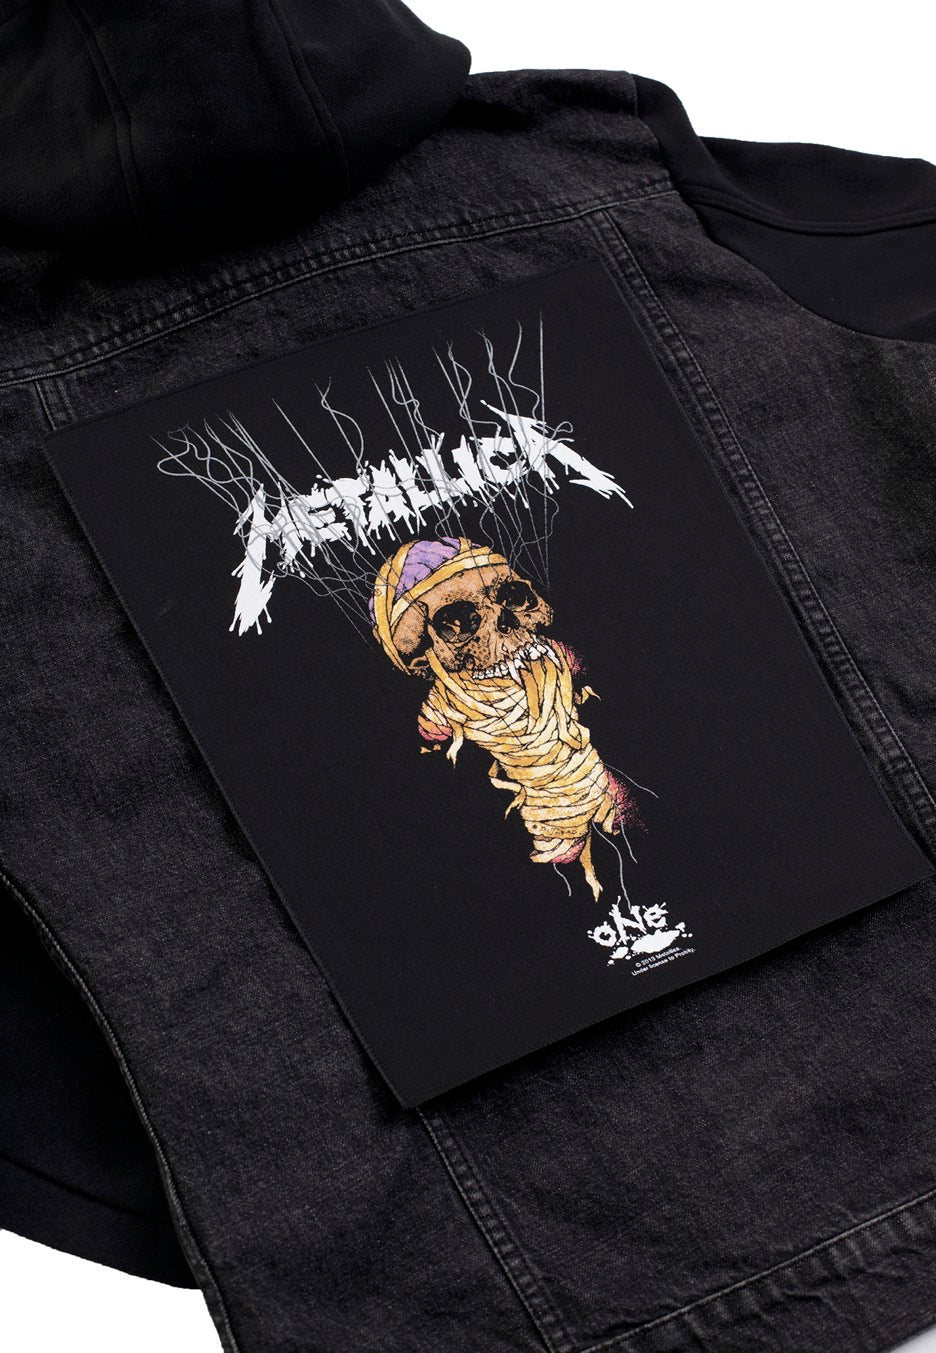 Metallica - One Strings - Backpatch